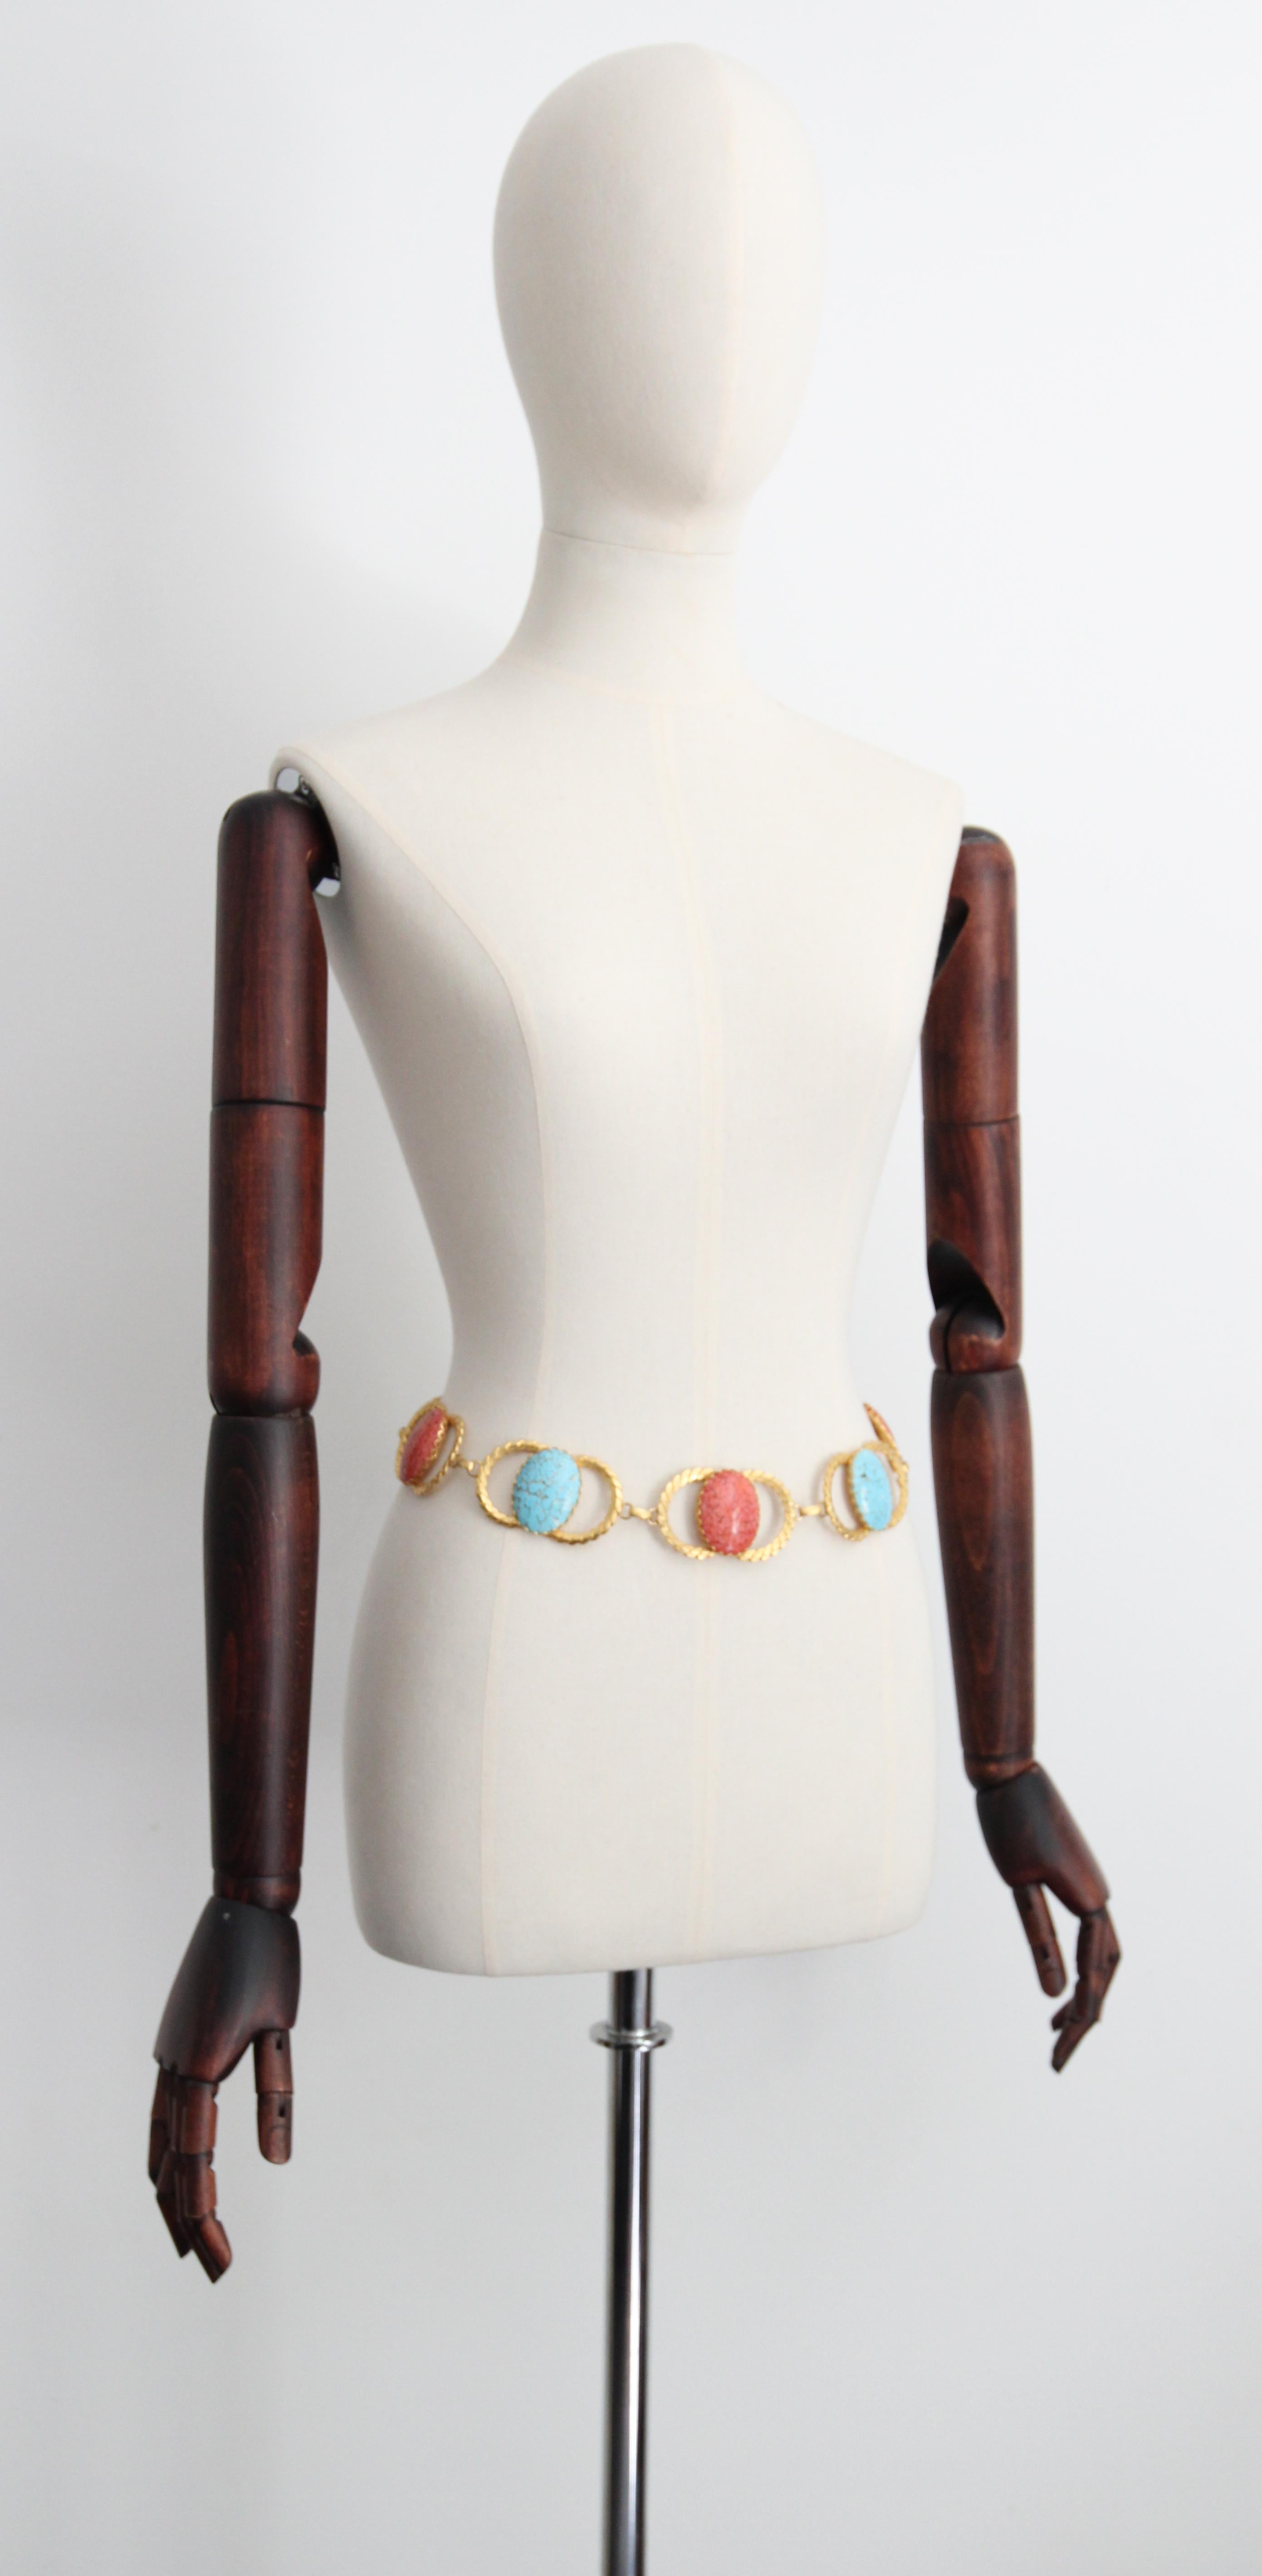 Vintage 1970's coral and turquoise glass cabochons waist chain belt UK 8 US 4 For Sale 1